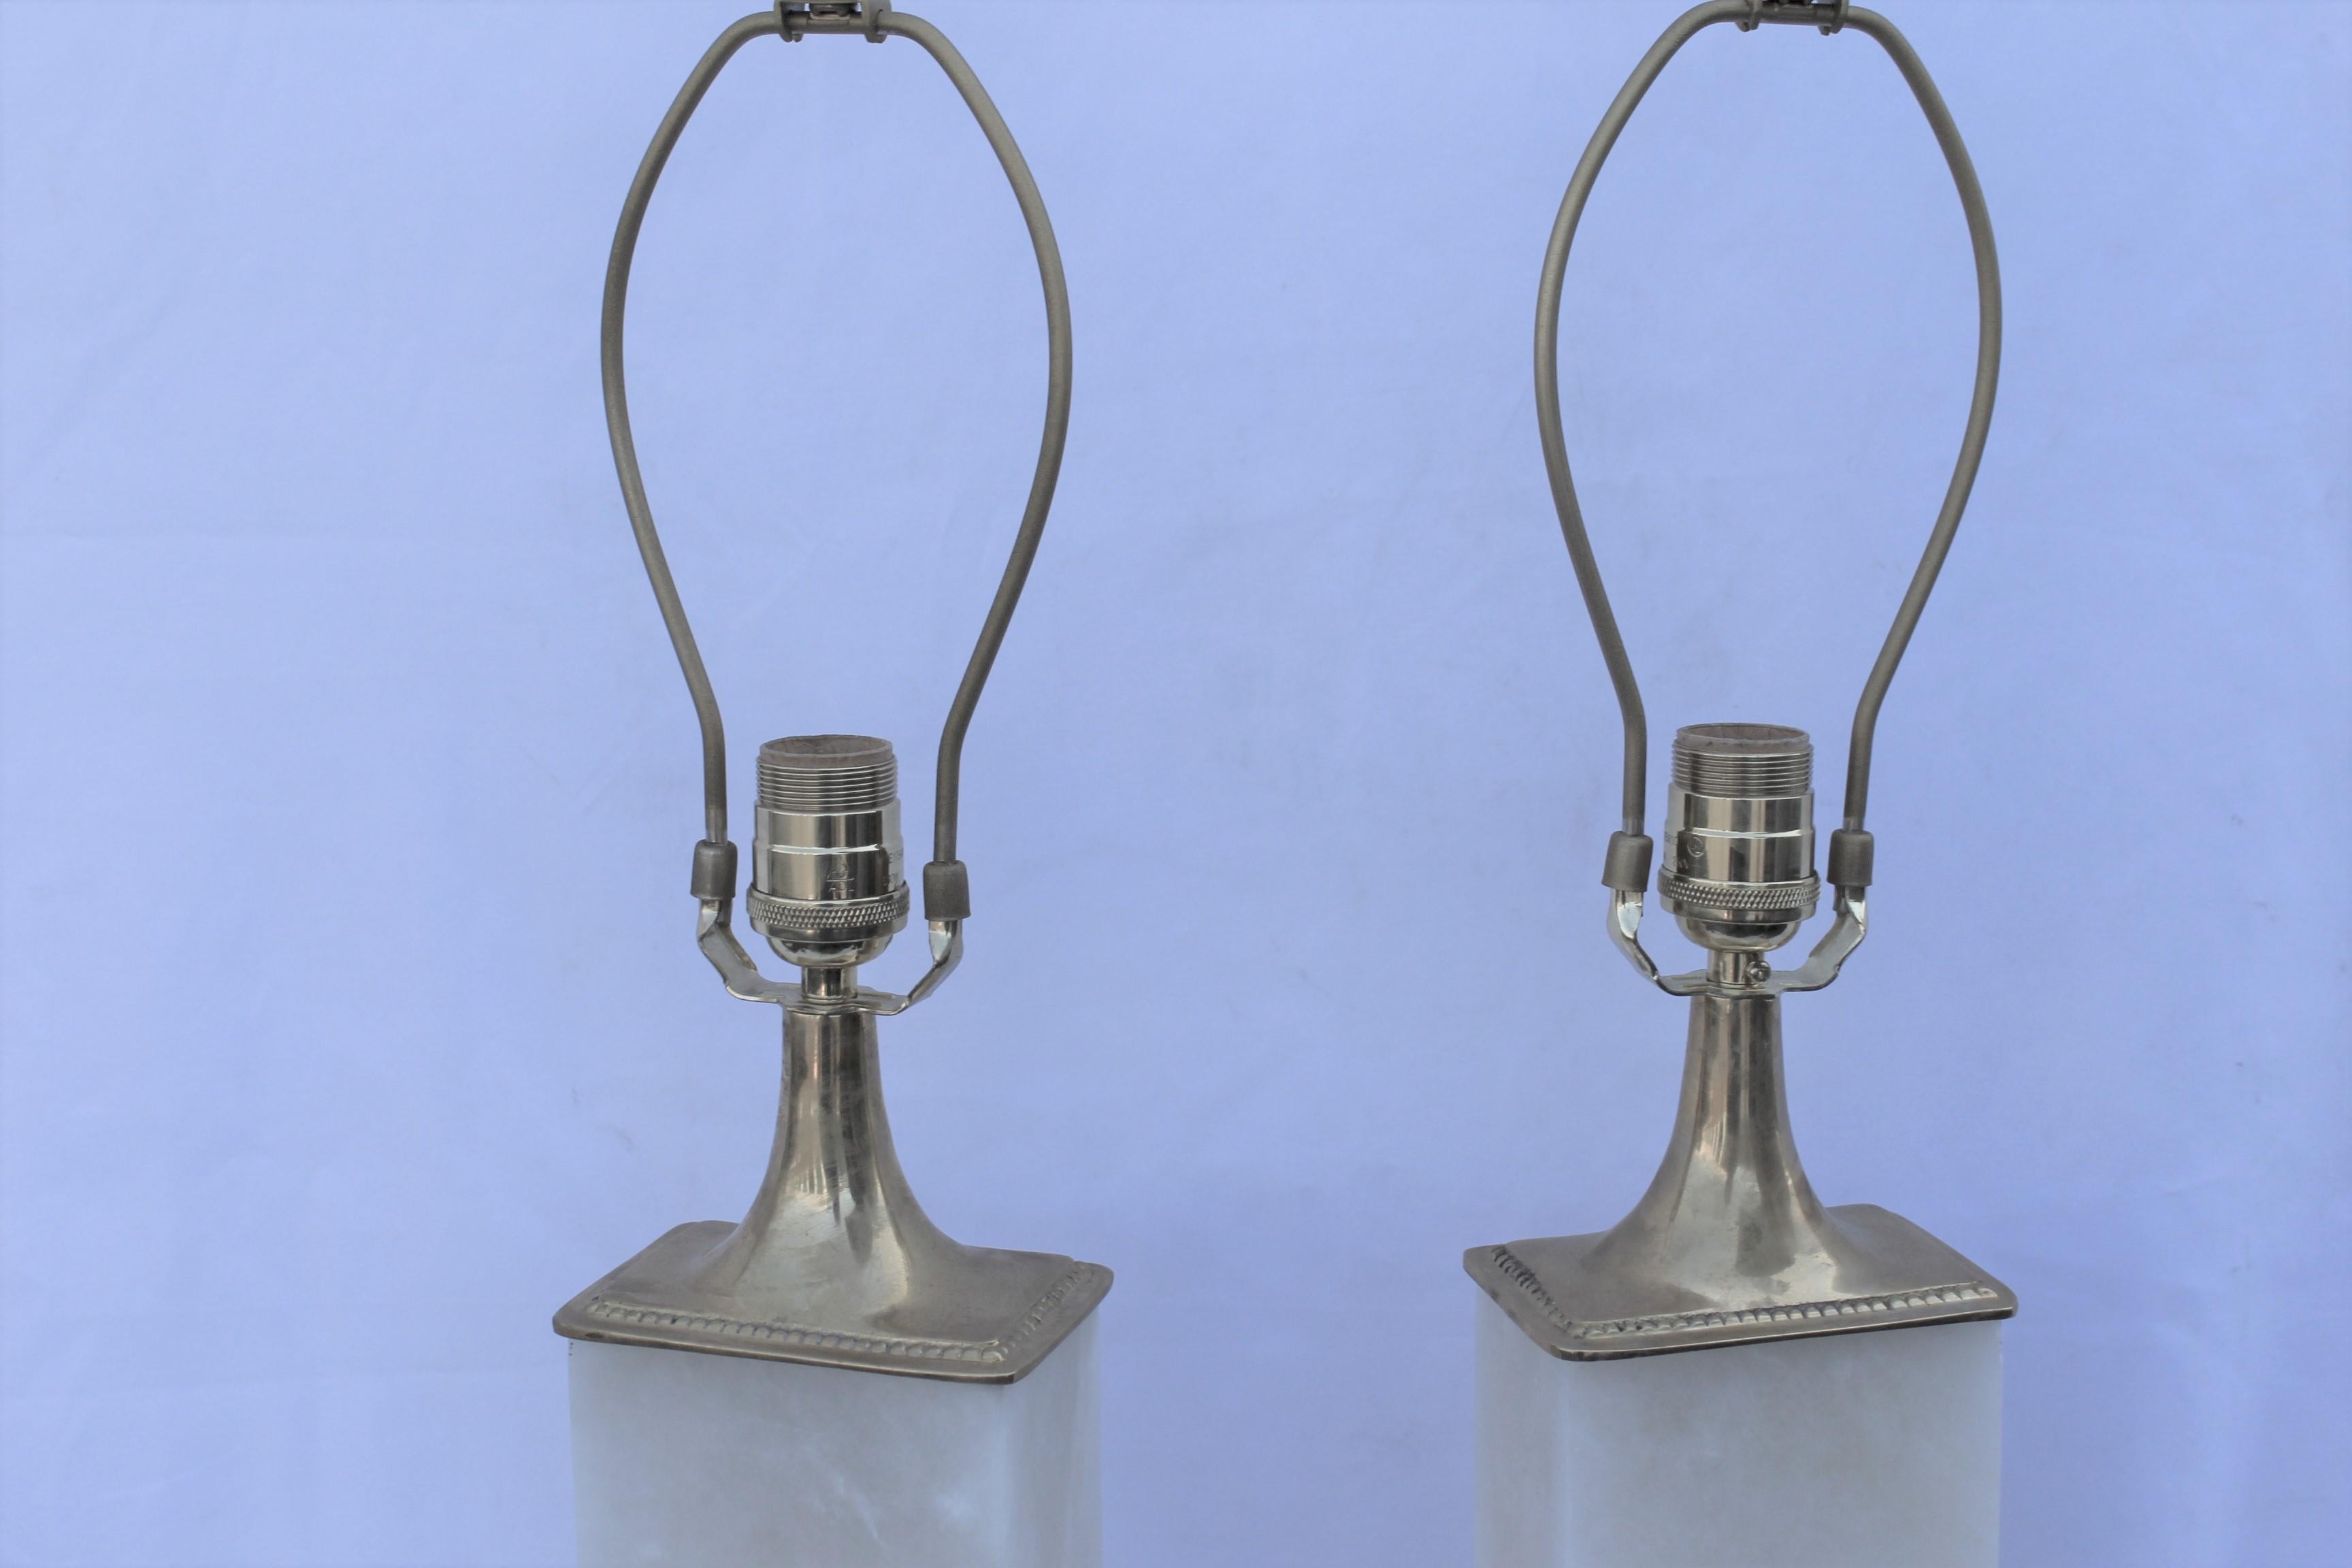 Alabaster Lamps, Solid Blocks, Hi-Polished Brass In Good Condition For Sale In Los Angeles, CA